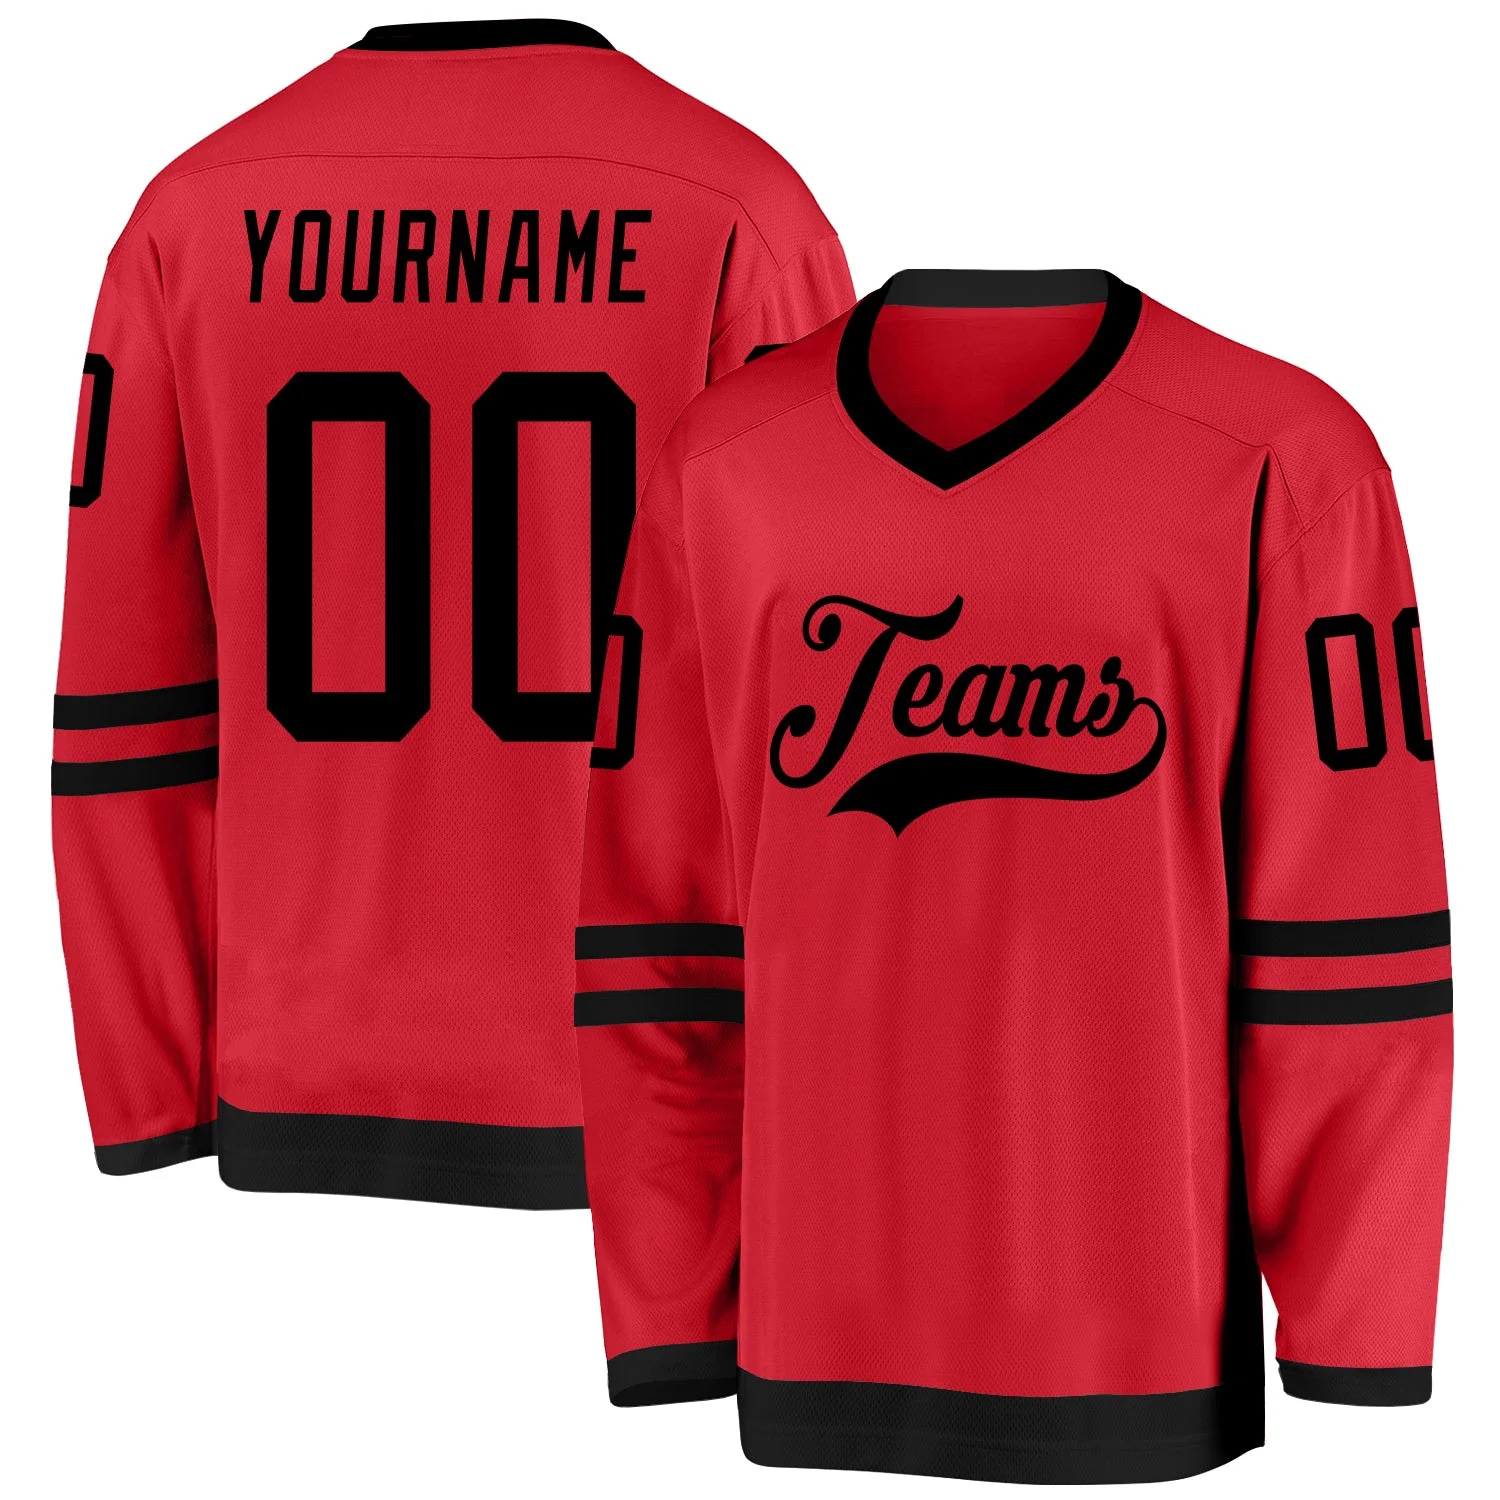 Stitched And Print Red Black Hockey Jersey Custom